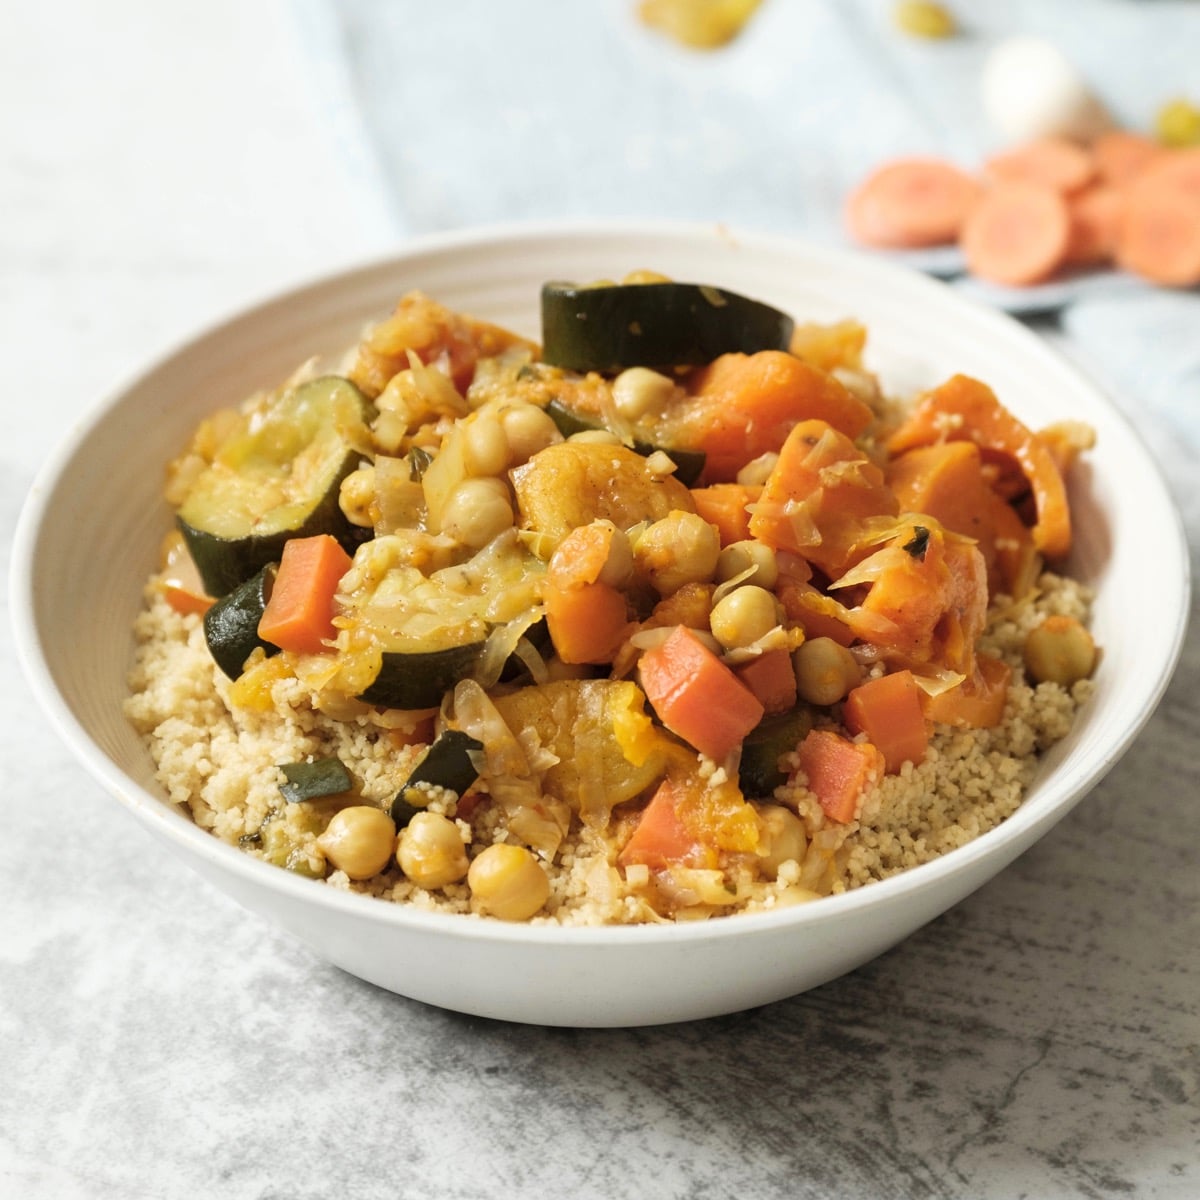 Square crop - dish of vegetable couscous on white marble background with towel, dry ingredients in backround - garlic, apricots, raisins.